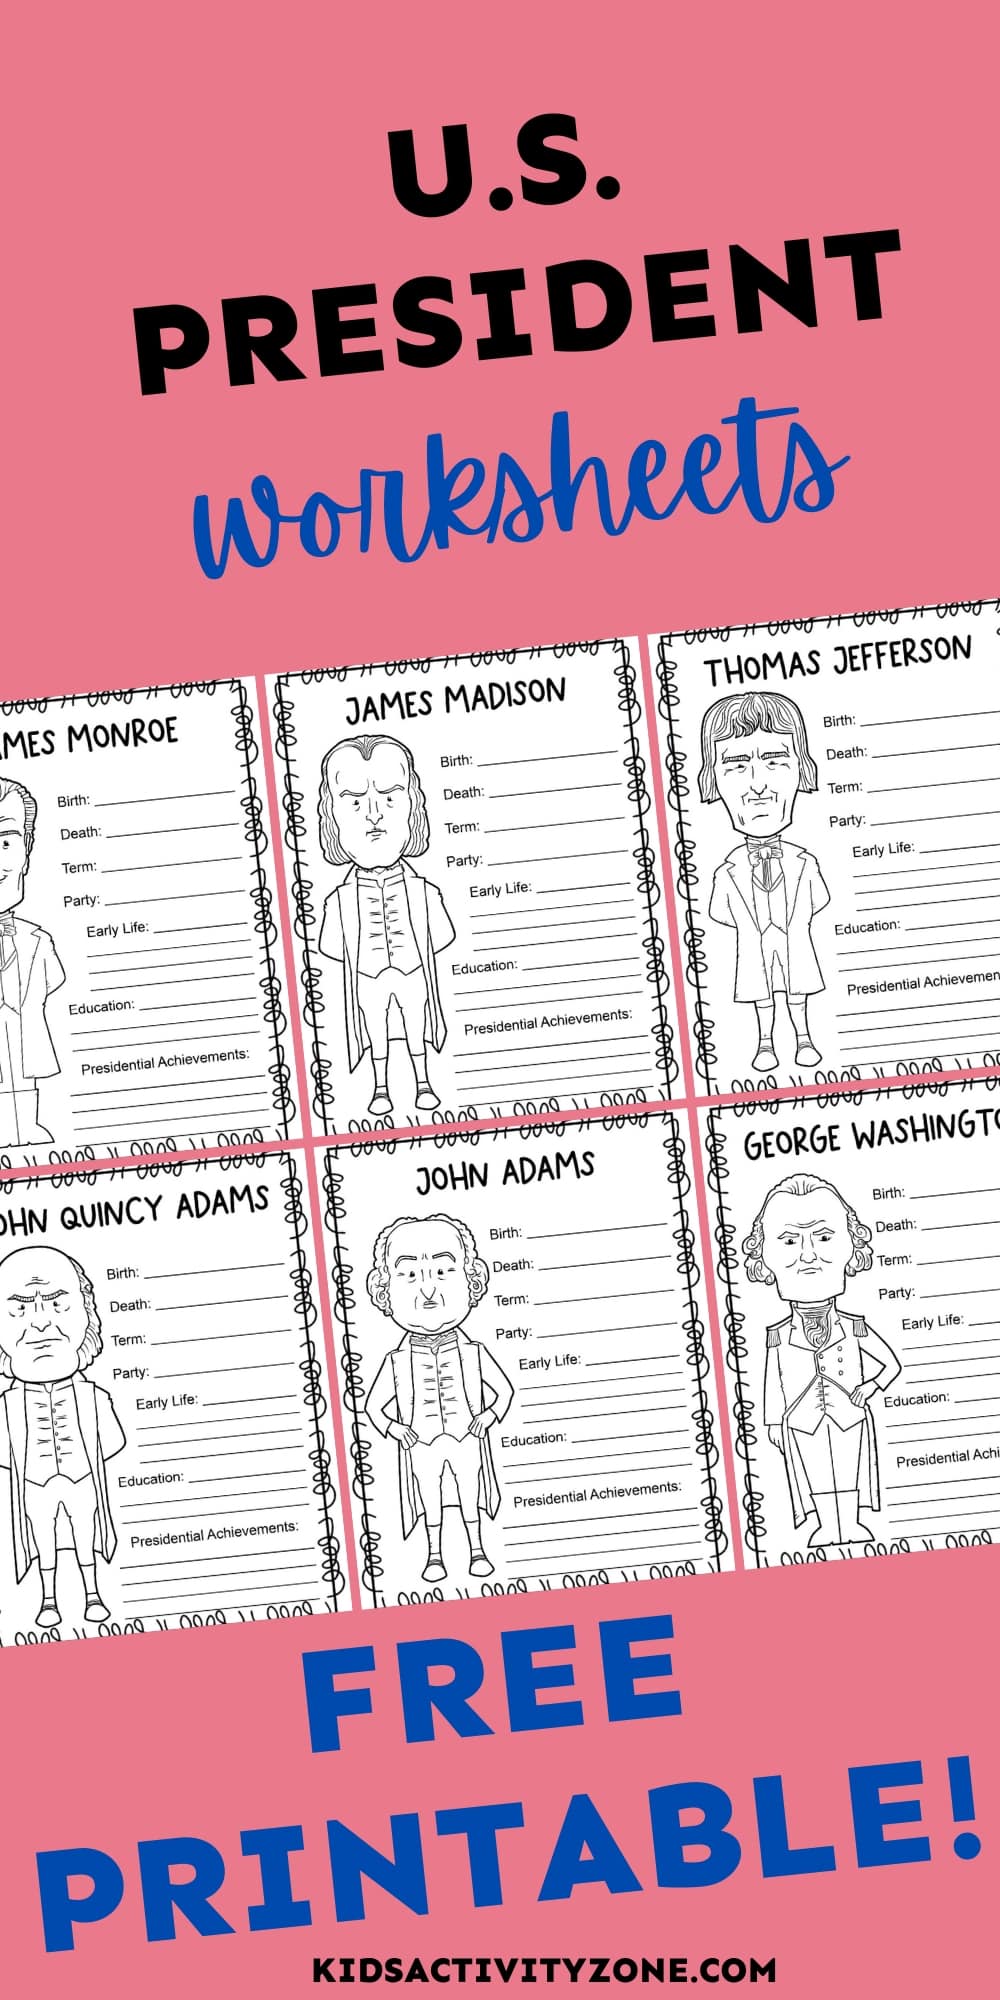 Free Printable United States President Worksheets serve as an excellent addition to any curriculum focusing on the nation's Presidents. For each President, there's a worksheet where students can document key details such as the President's birthdate, date of death, term in office, political affiliation, as well as insights into their early life, educational background, and notable accomplishments during their presidency.